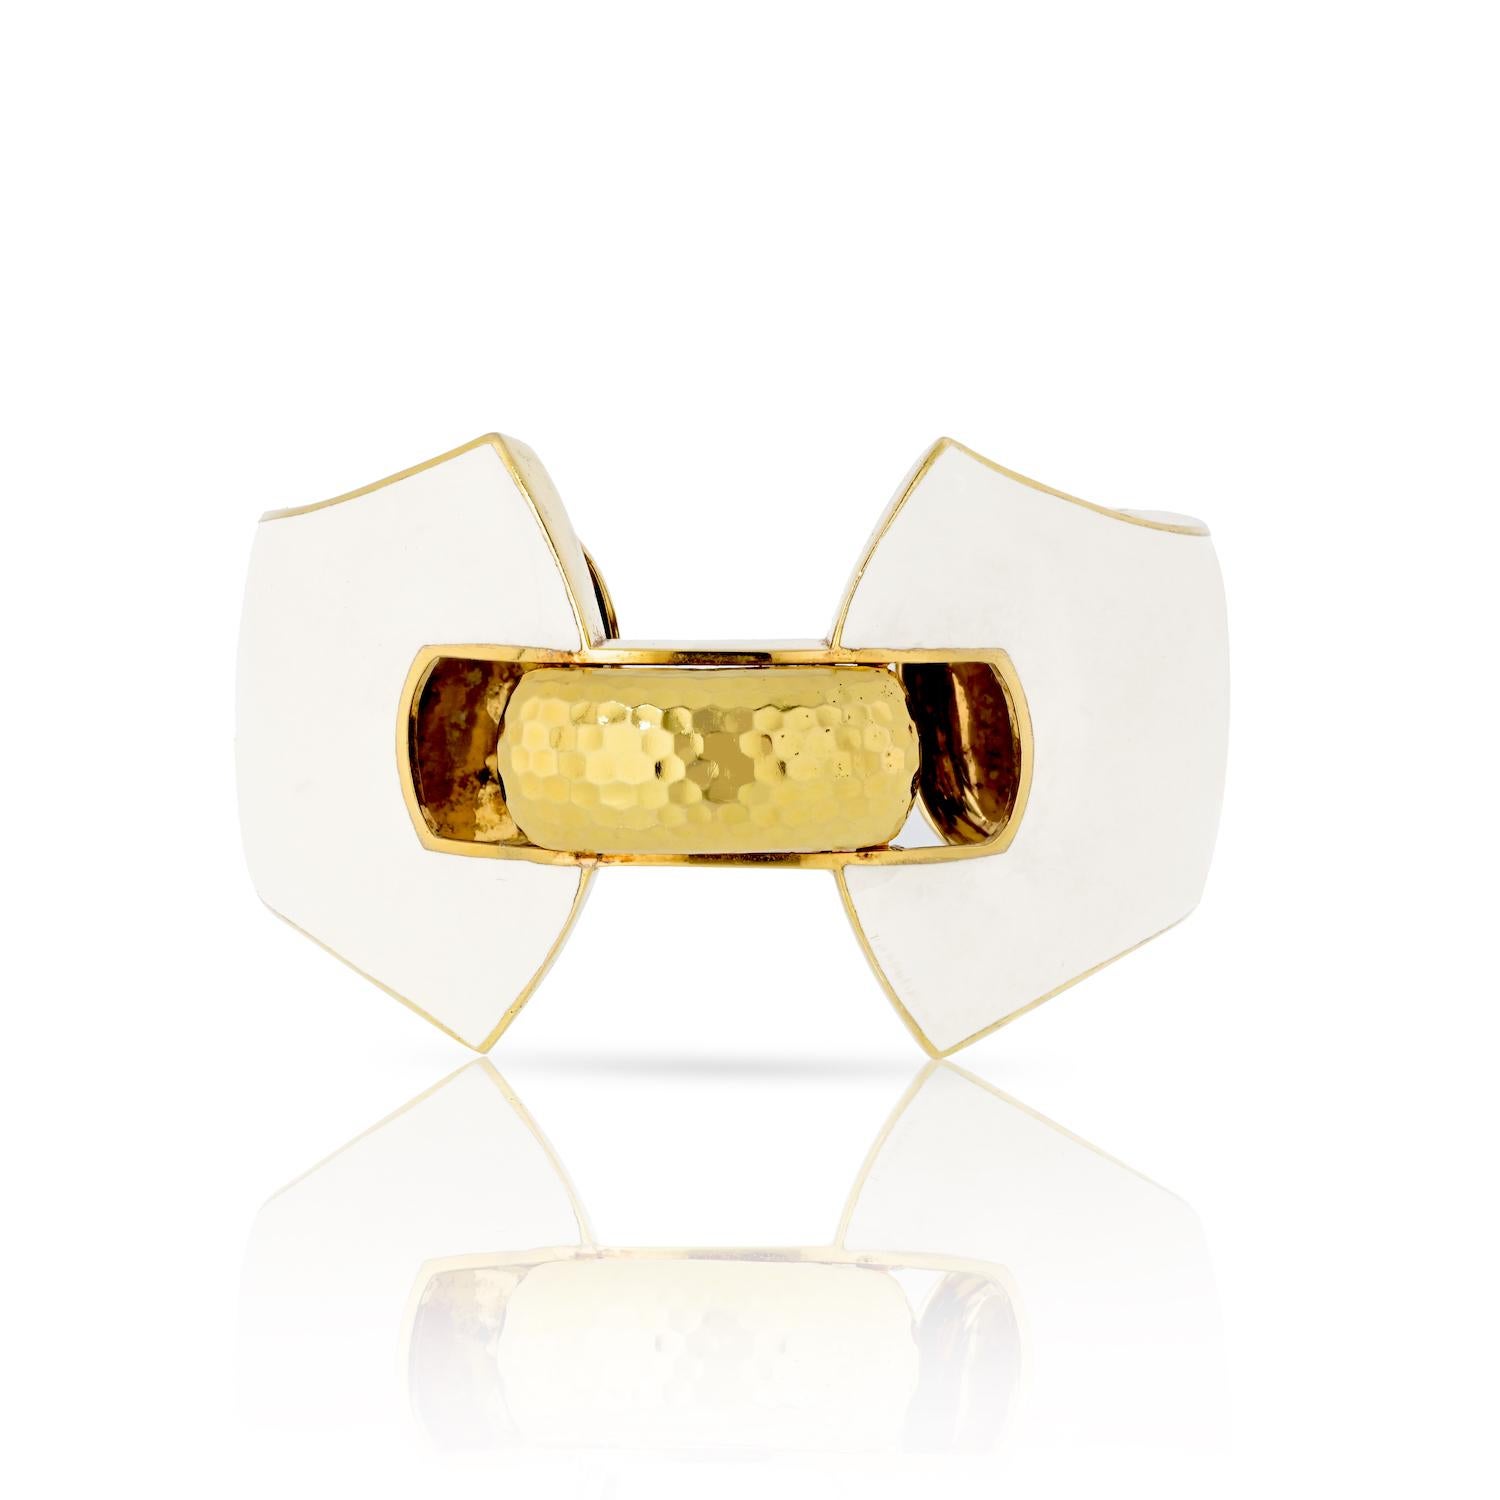 From David Webb's iconic Manhattan Minimalism collection, this exquisite ivory white enamel cuff bracelet is a true work of art. 

Expertly crafted in 18 karat yellow gold. The cuff's unique shape and size make it a statement accessory. 

The inner